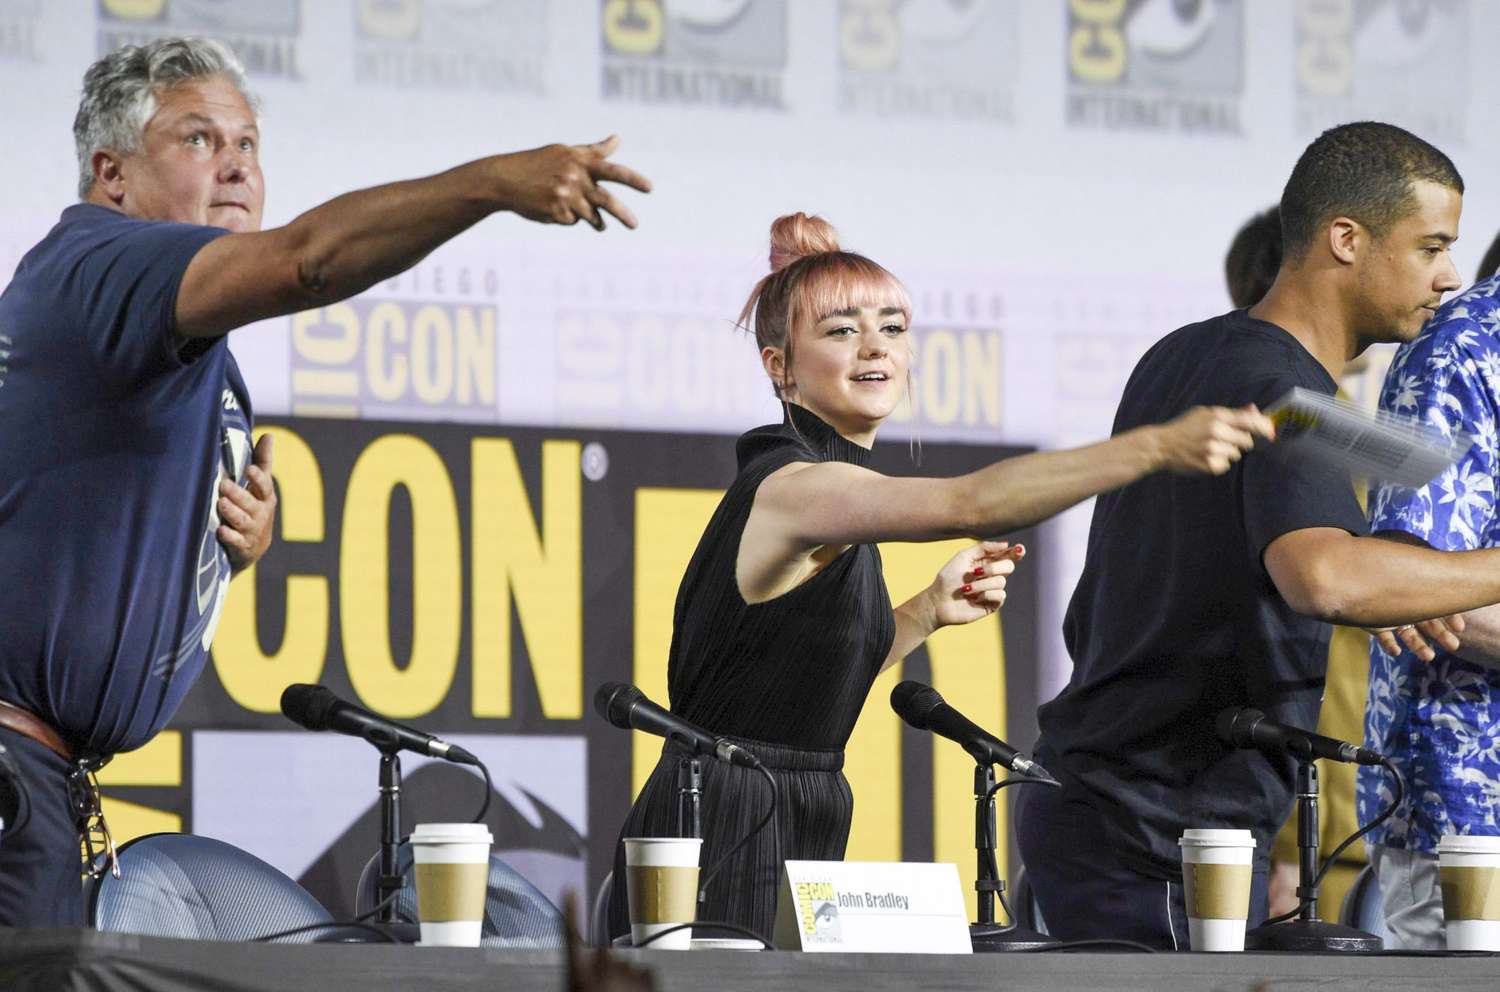 Mandatory Credit: Photo by Chris Pizzello/Invision/AP/Shutterstock (10342099k) Conleth Hill, Maisie Williams, Jacob Anderson. Conleth Hill, from left, Maisie Williams and Jacob Anderson throw their name card to the audience at the conclusion of the "Game of Thrones" panel on day two of Comic-Con International, in San Diego 2019 Comic-Con - "Game of Thrones" Panel, San Diego, USA - 19 Jul 2019